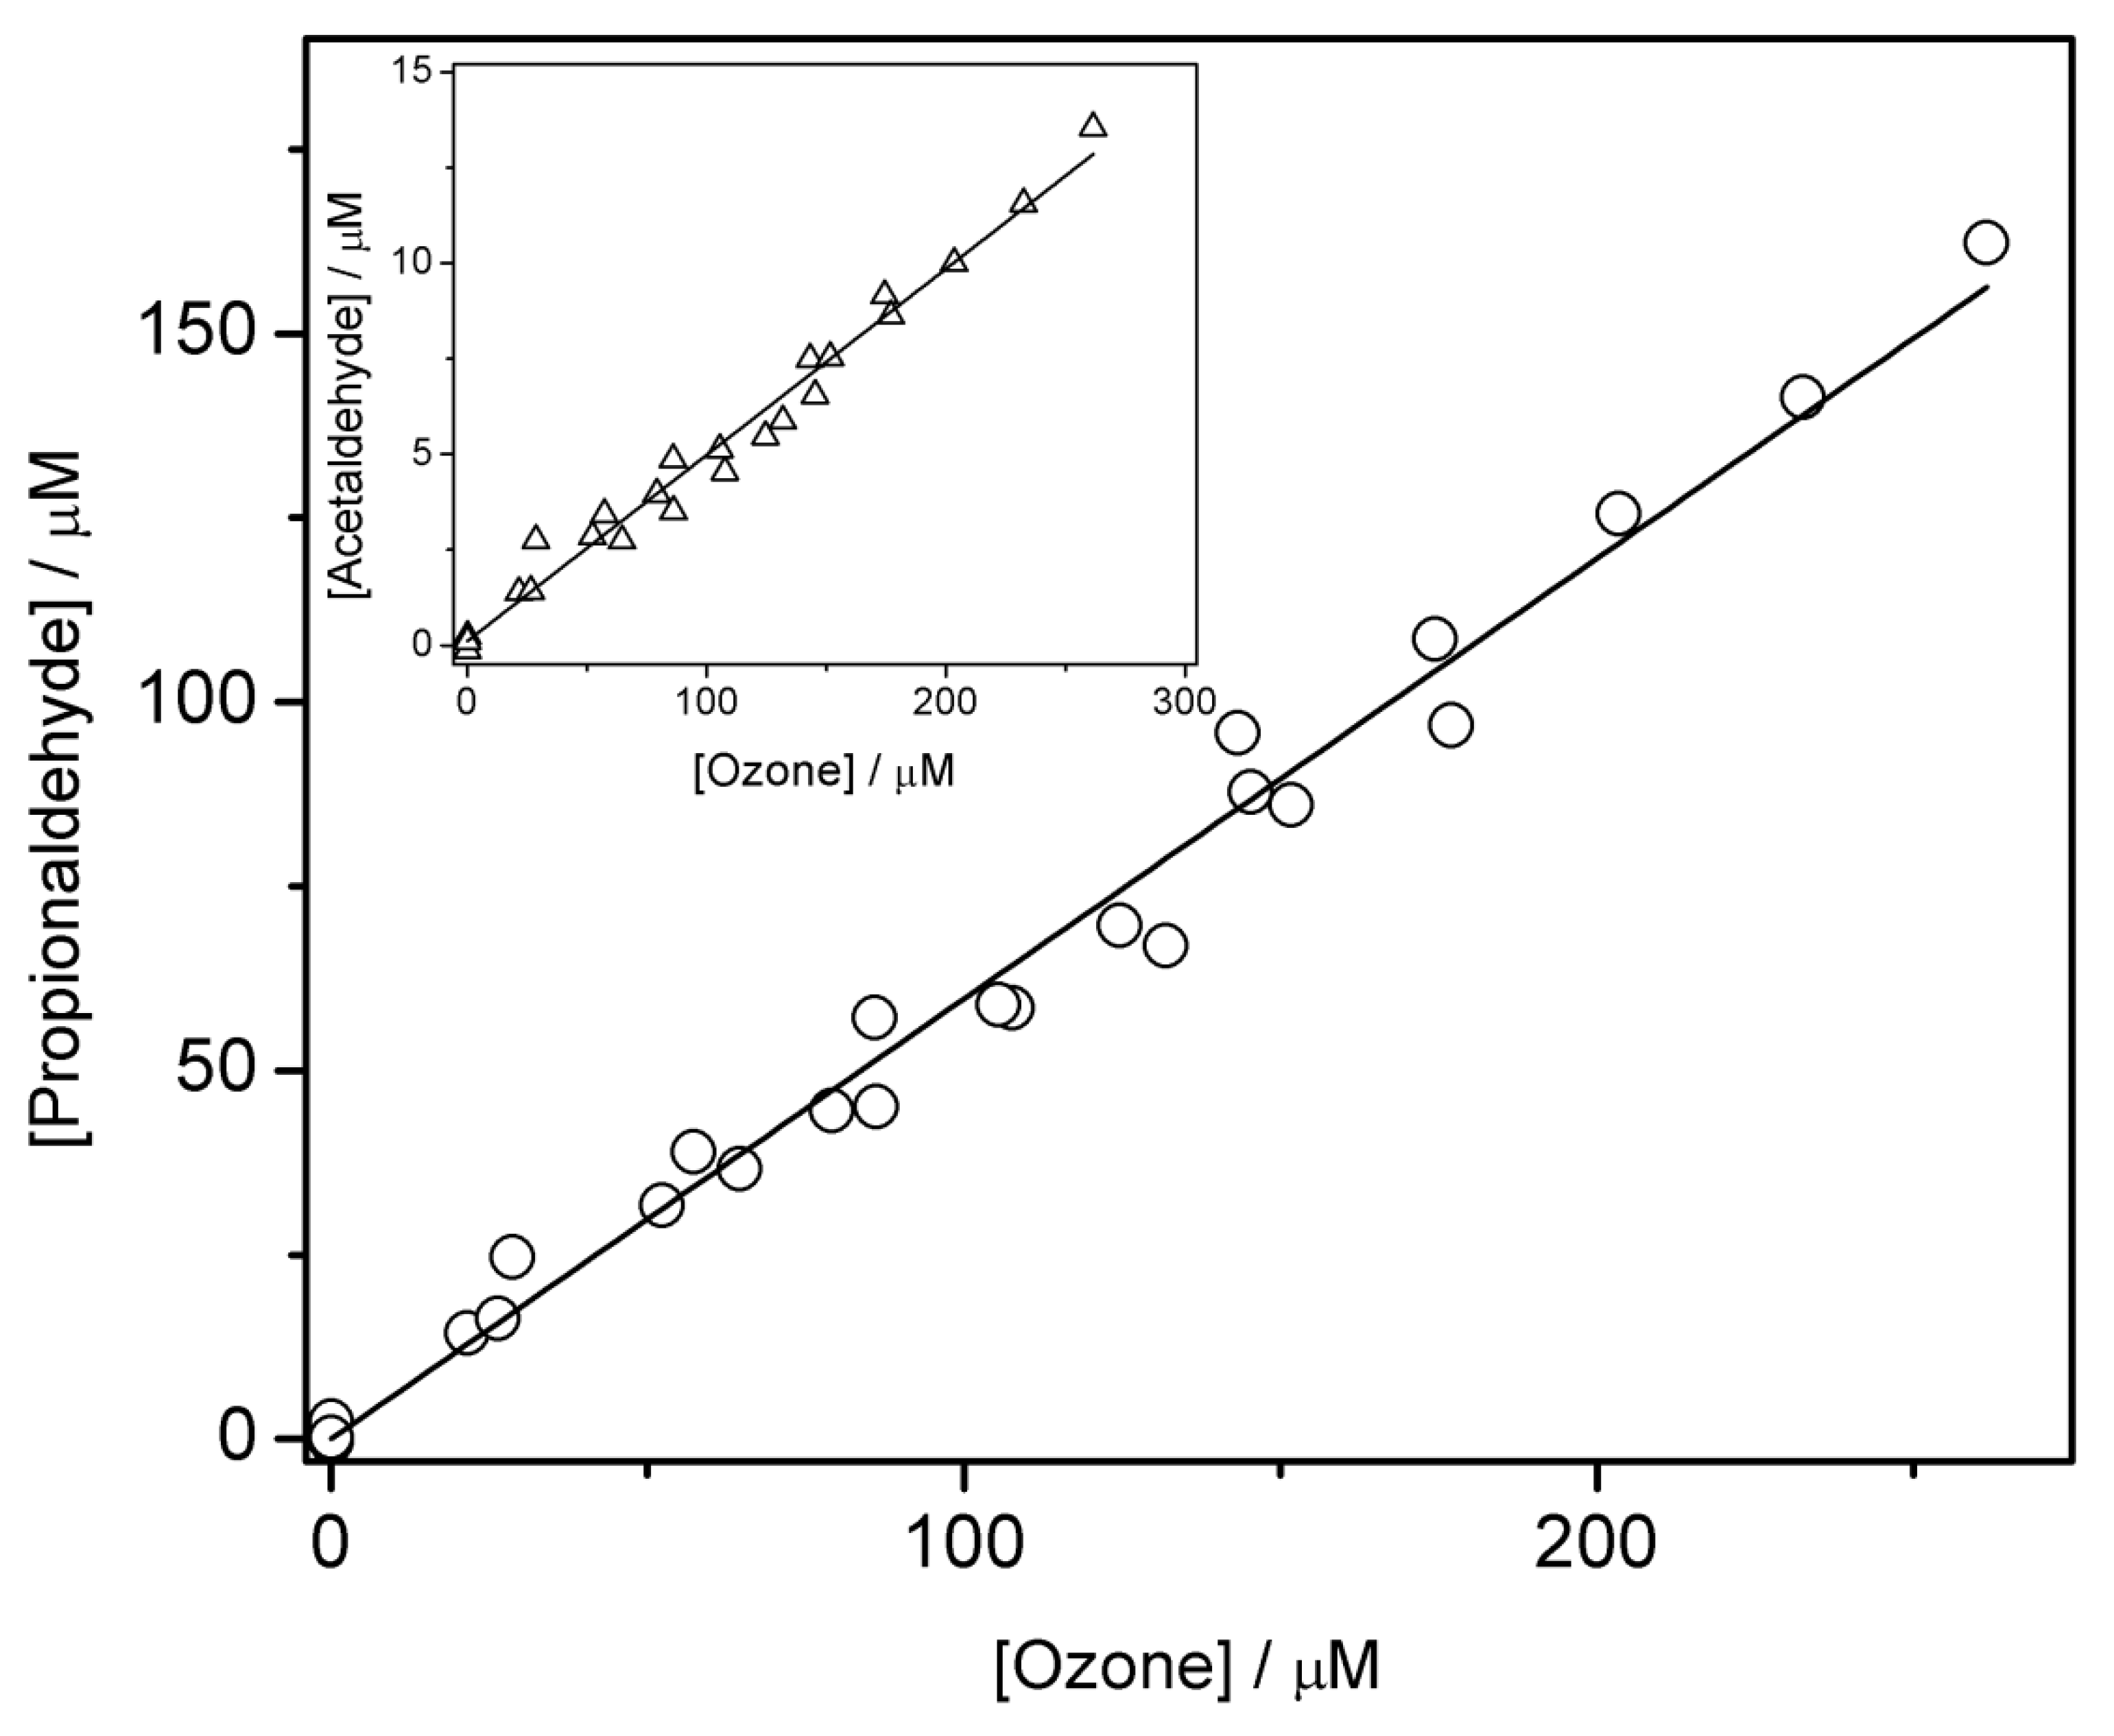 lawn wipe out mat IJMS | Free Full-Text | Reaction of 1-propanol with Ozone in Aqueous Media  | HTML